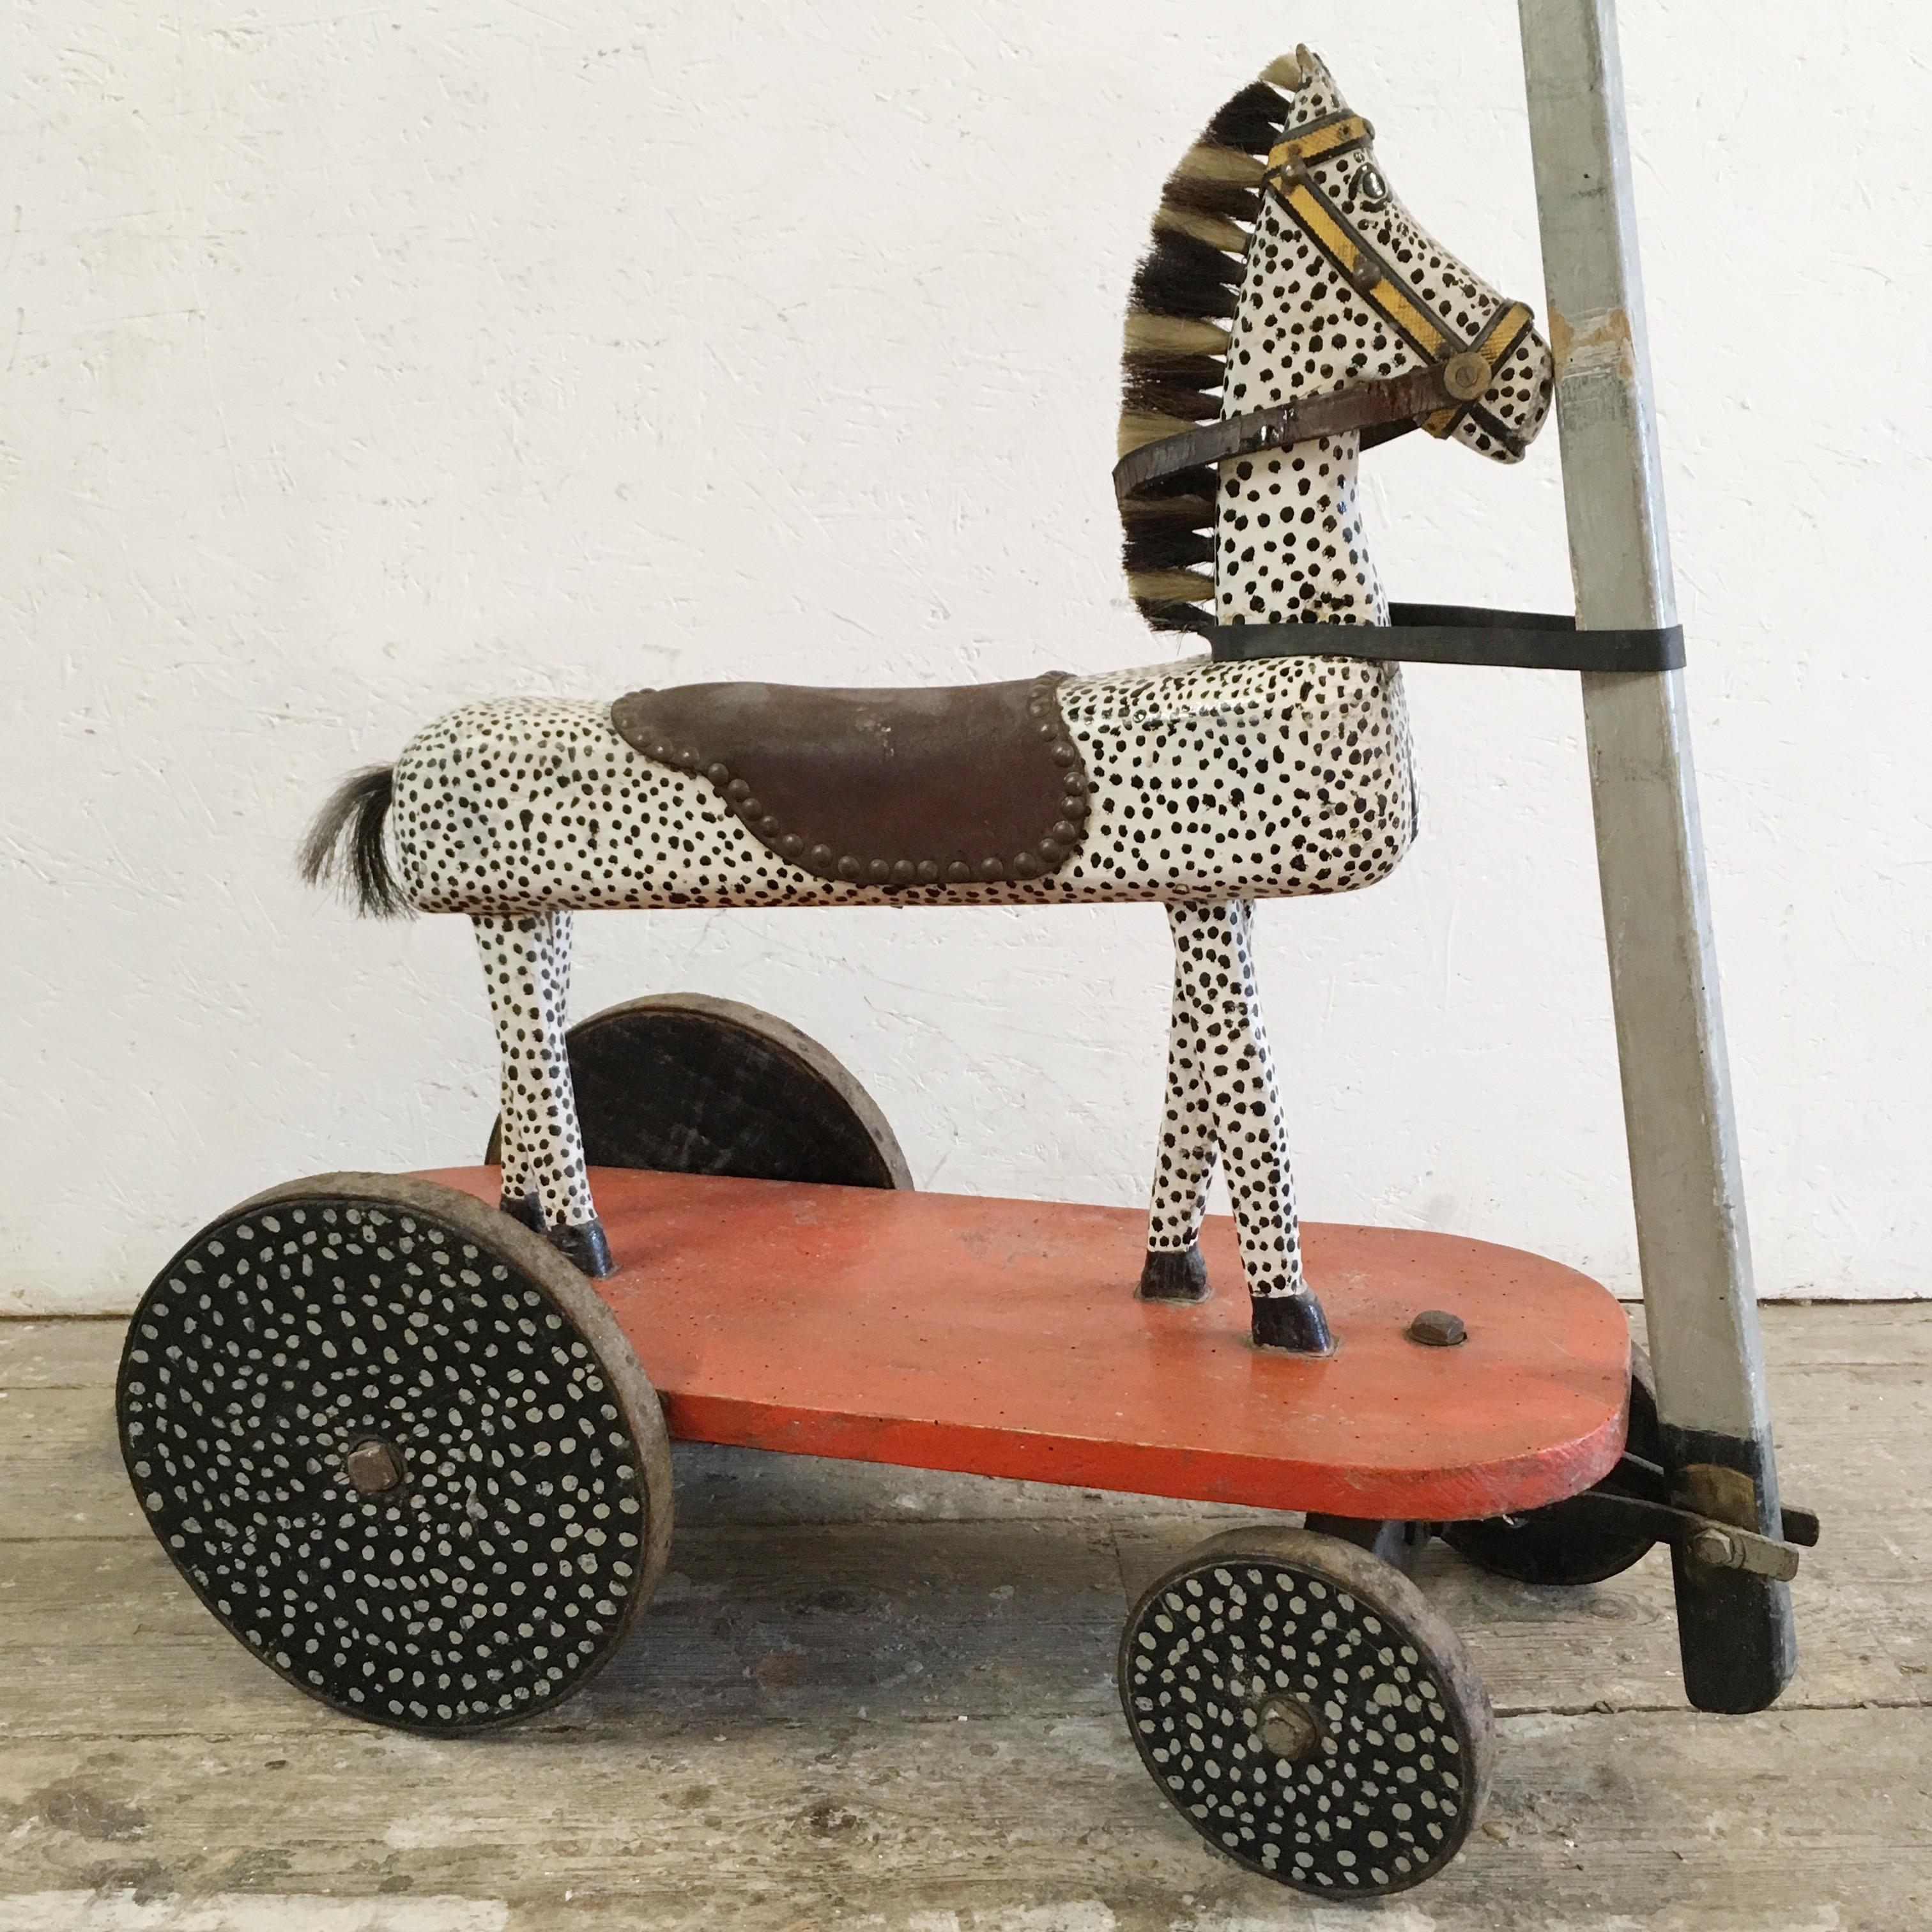 Handcrafted French childs pull along wooden horse.
Fantastic hand painted spotty wooden horse on wheeled base, pull along handle.
The wheels have also been painted spotty in black and white, opposite to the horse,
circa 1930s-1950s.
The horse